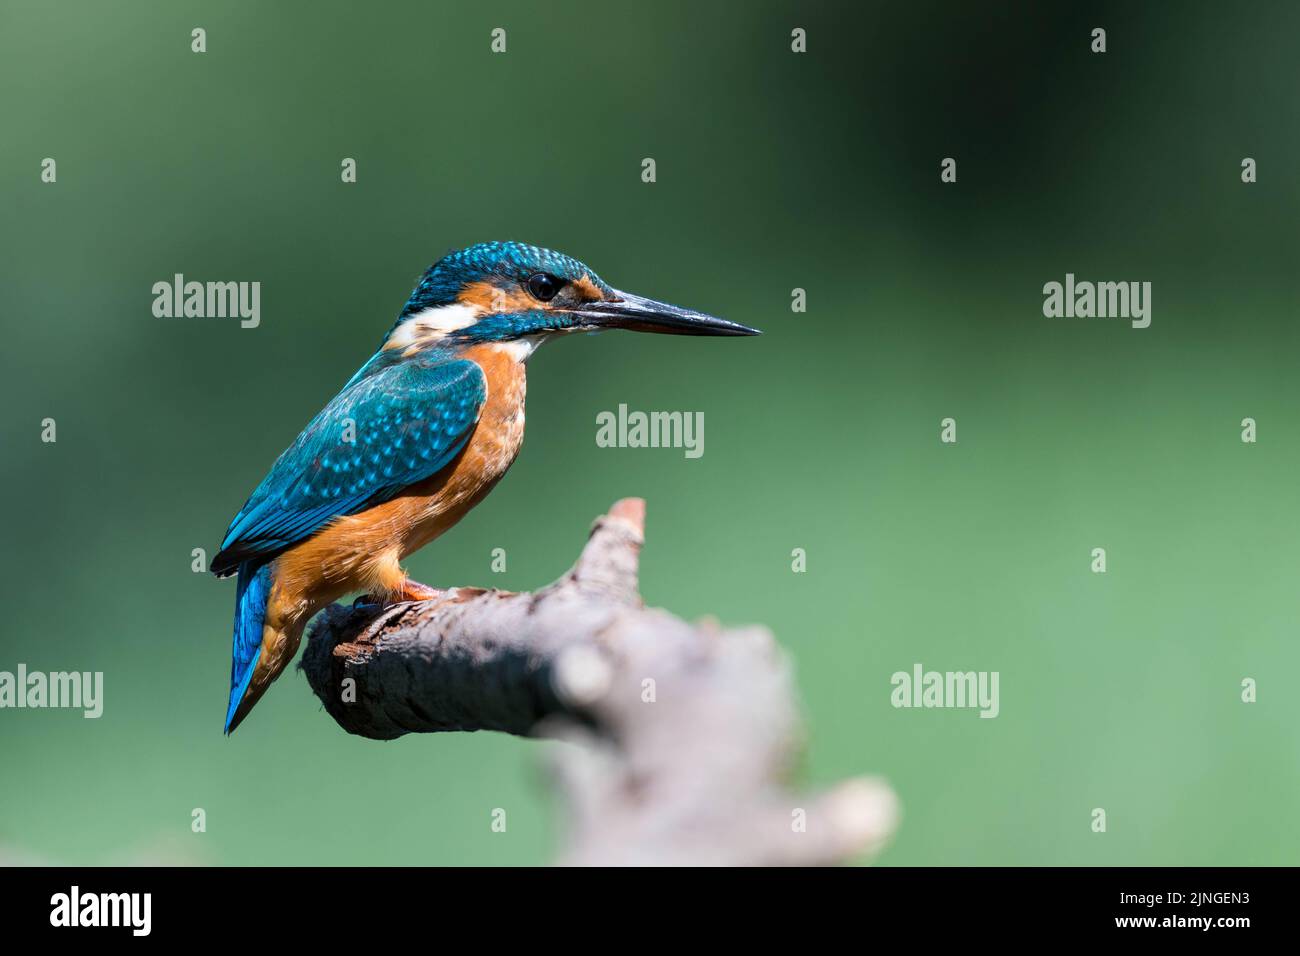 Common Kingfisher (Alcedo atthis), Wales, Uk, sat on perch in drought conditions in Britain during heatwave -climate change or  global warming. Stock Photo